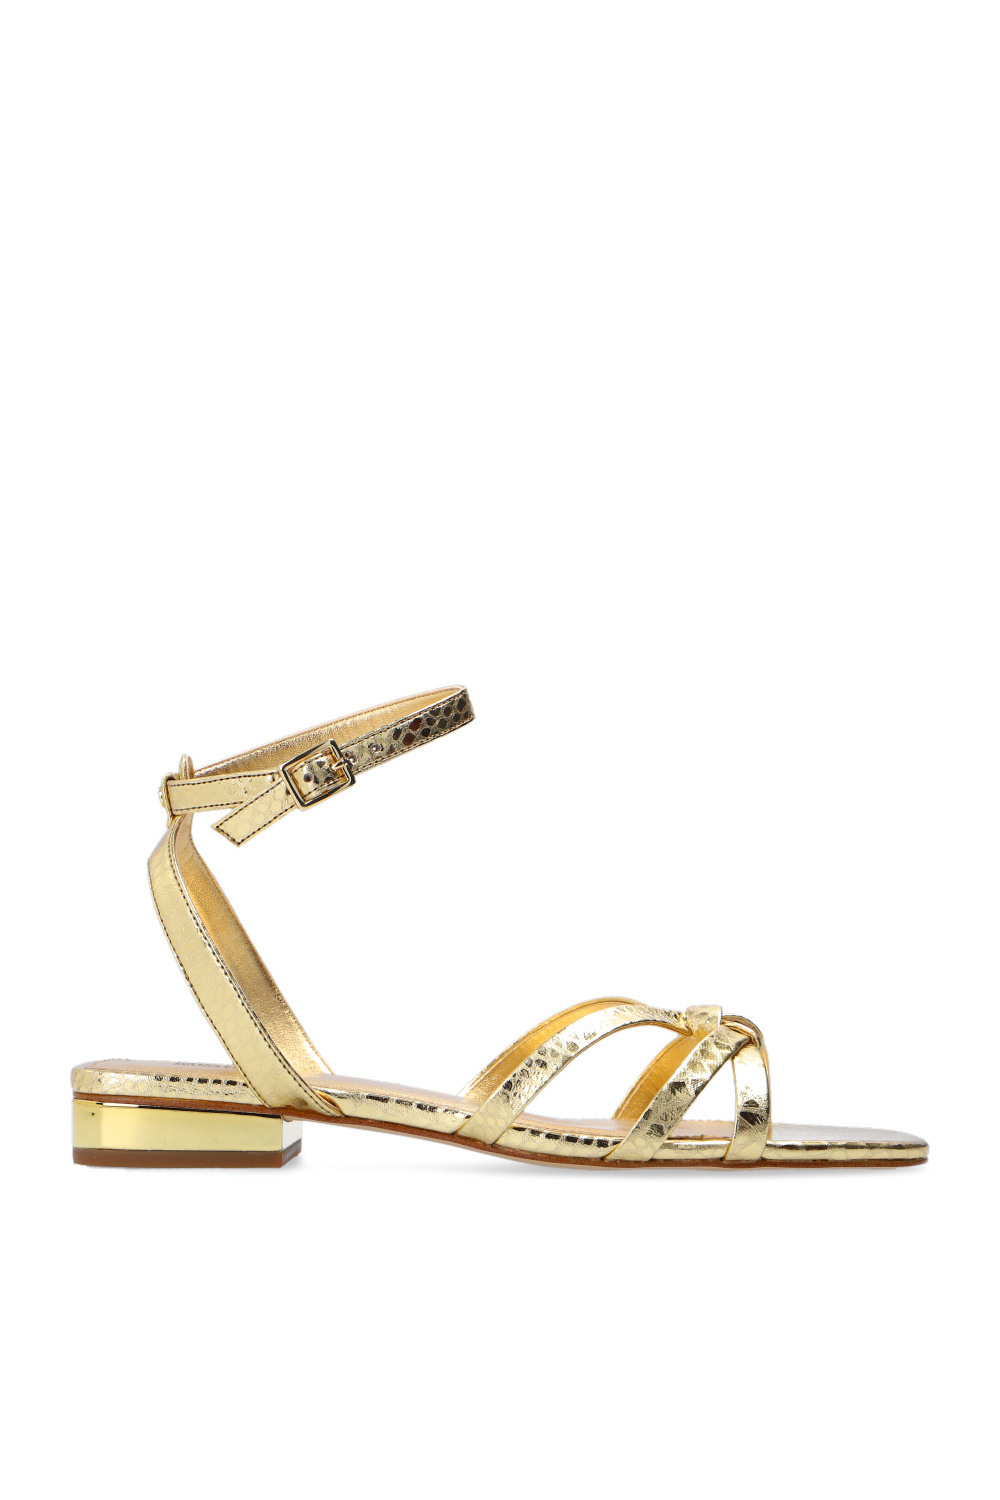 MICHAEL KORS SANDAL IN GOLD COLOR LEATHER